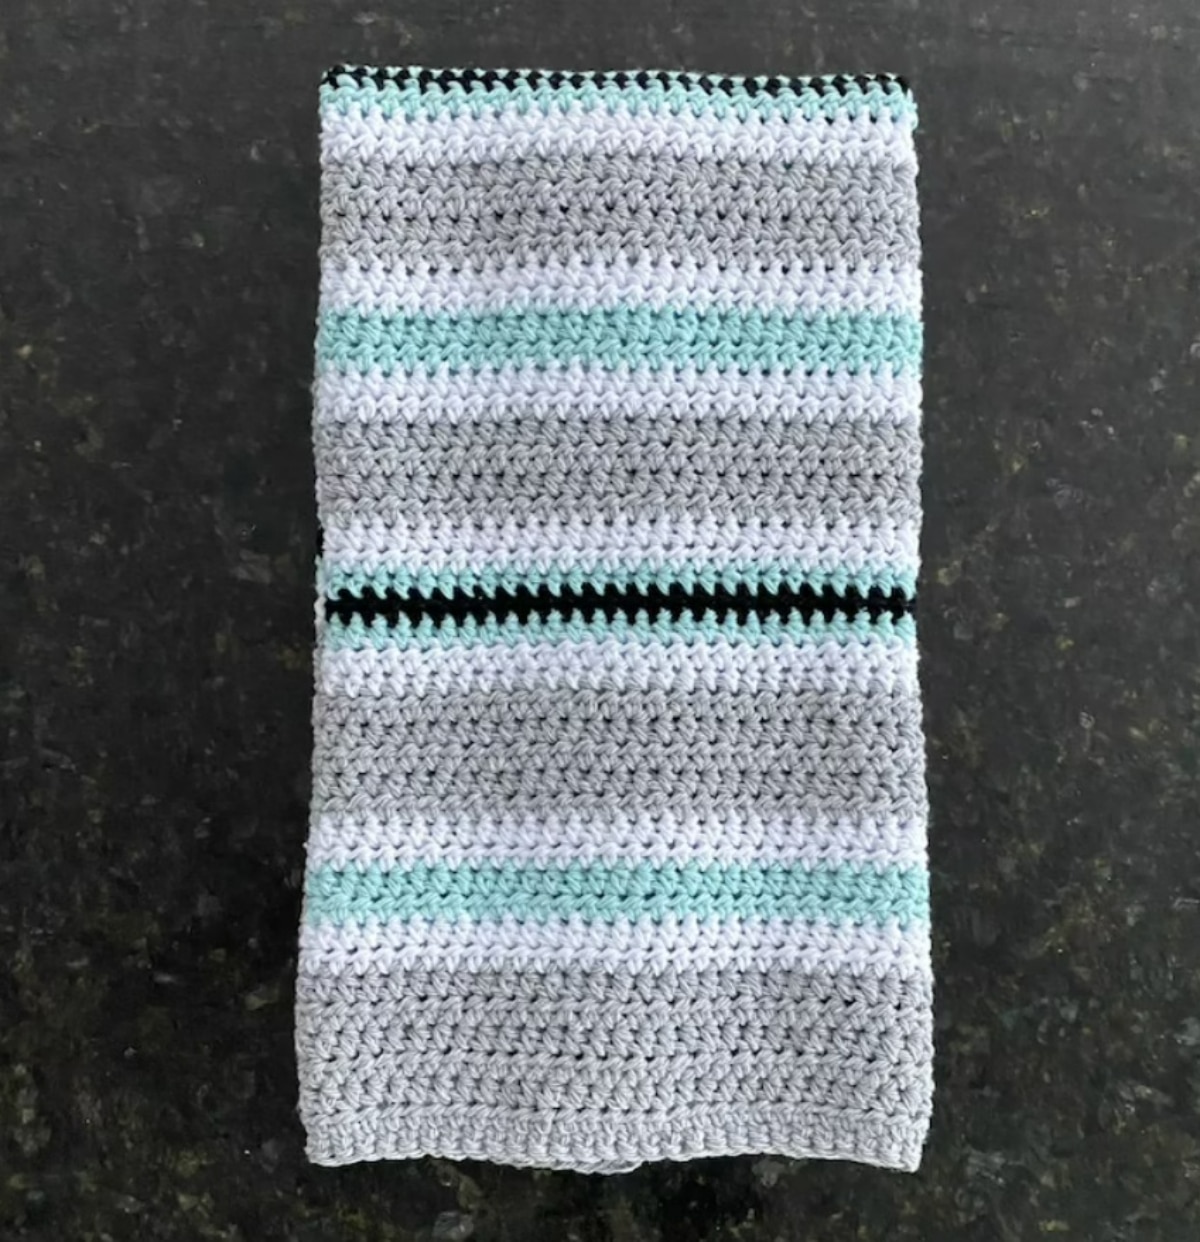 Two square white, gray, and blue horizontal striped crochet dish cloths on a dark gray countertop.